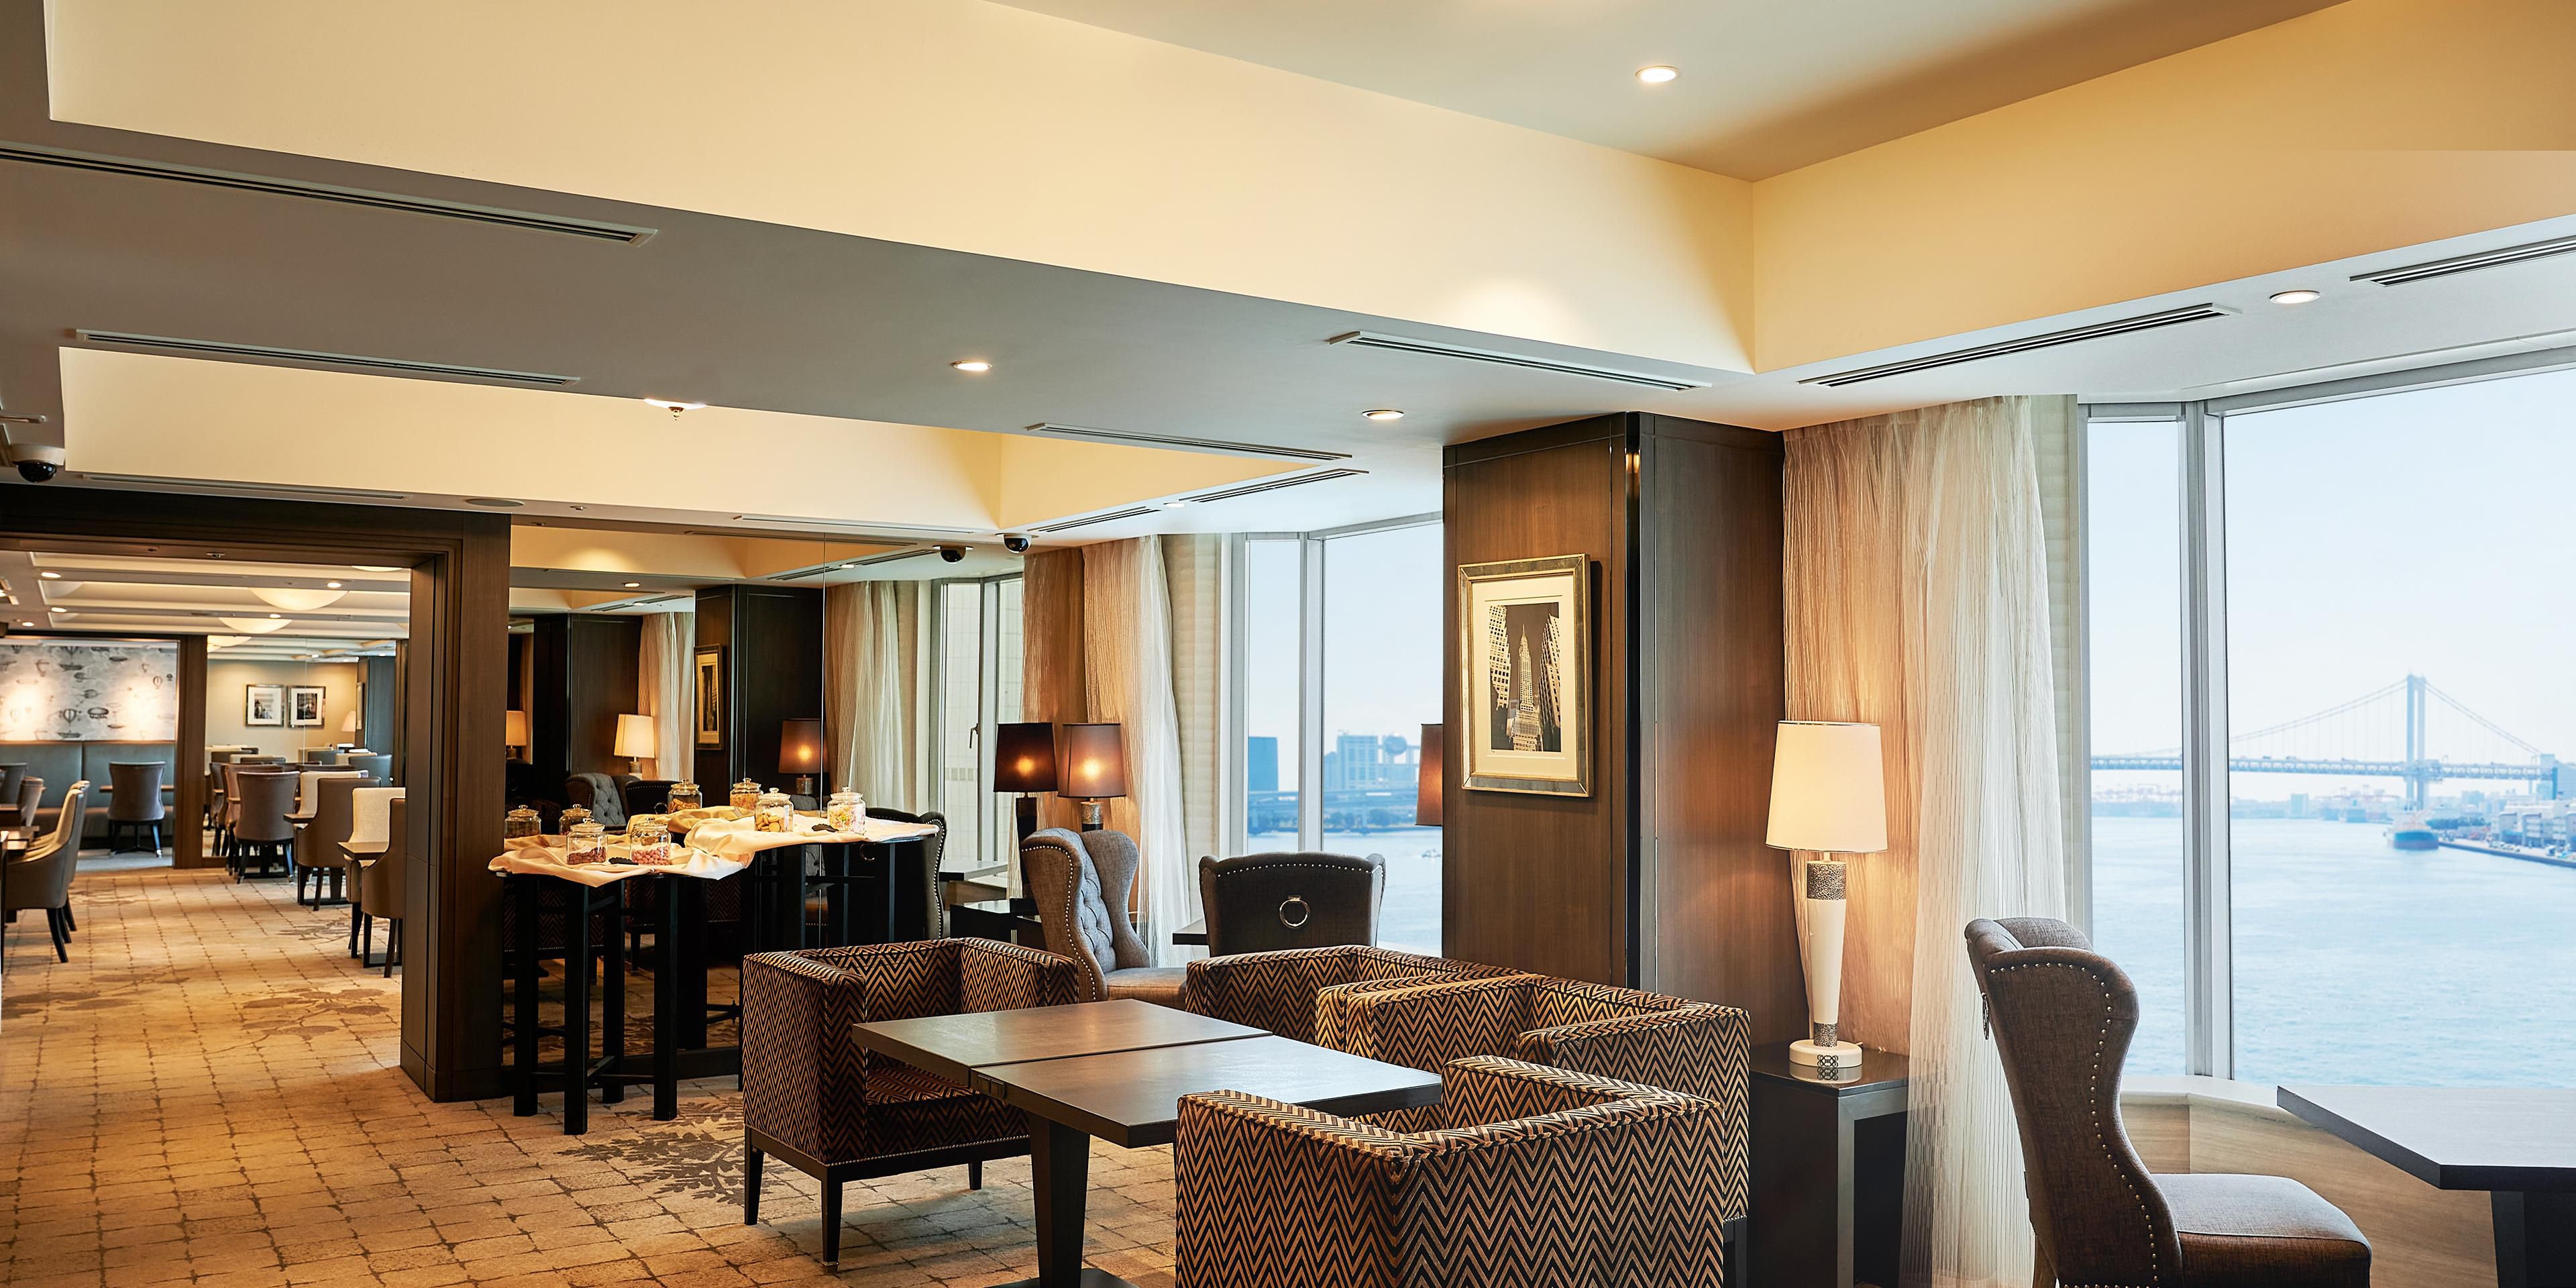 With spectacular views of the waterfront, the Club InterContinental Lounge offers unobstructed views of the Rainbow Bridge and Tokyo Bay from the 20th floor. Club level guests enjoy exclusive access to the lounge, with personalised food and beverage services.